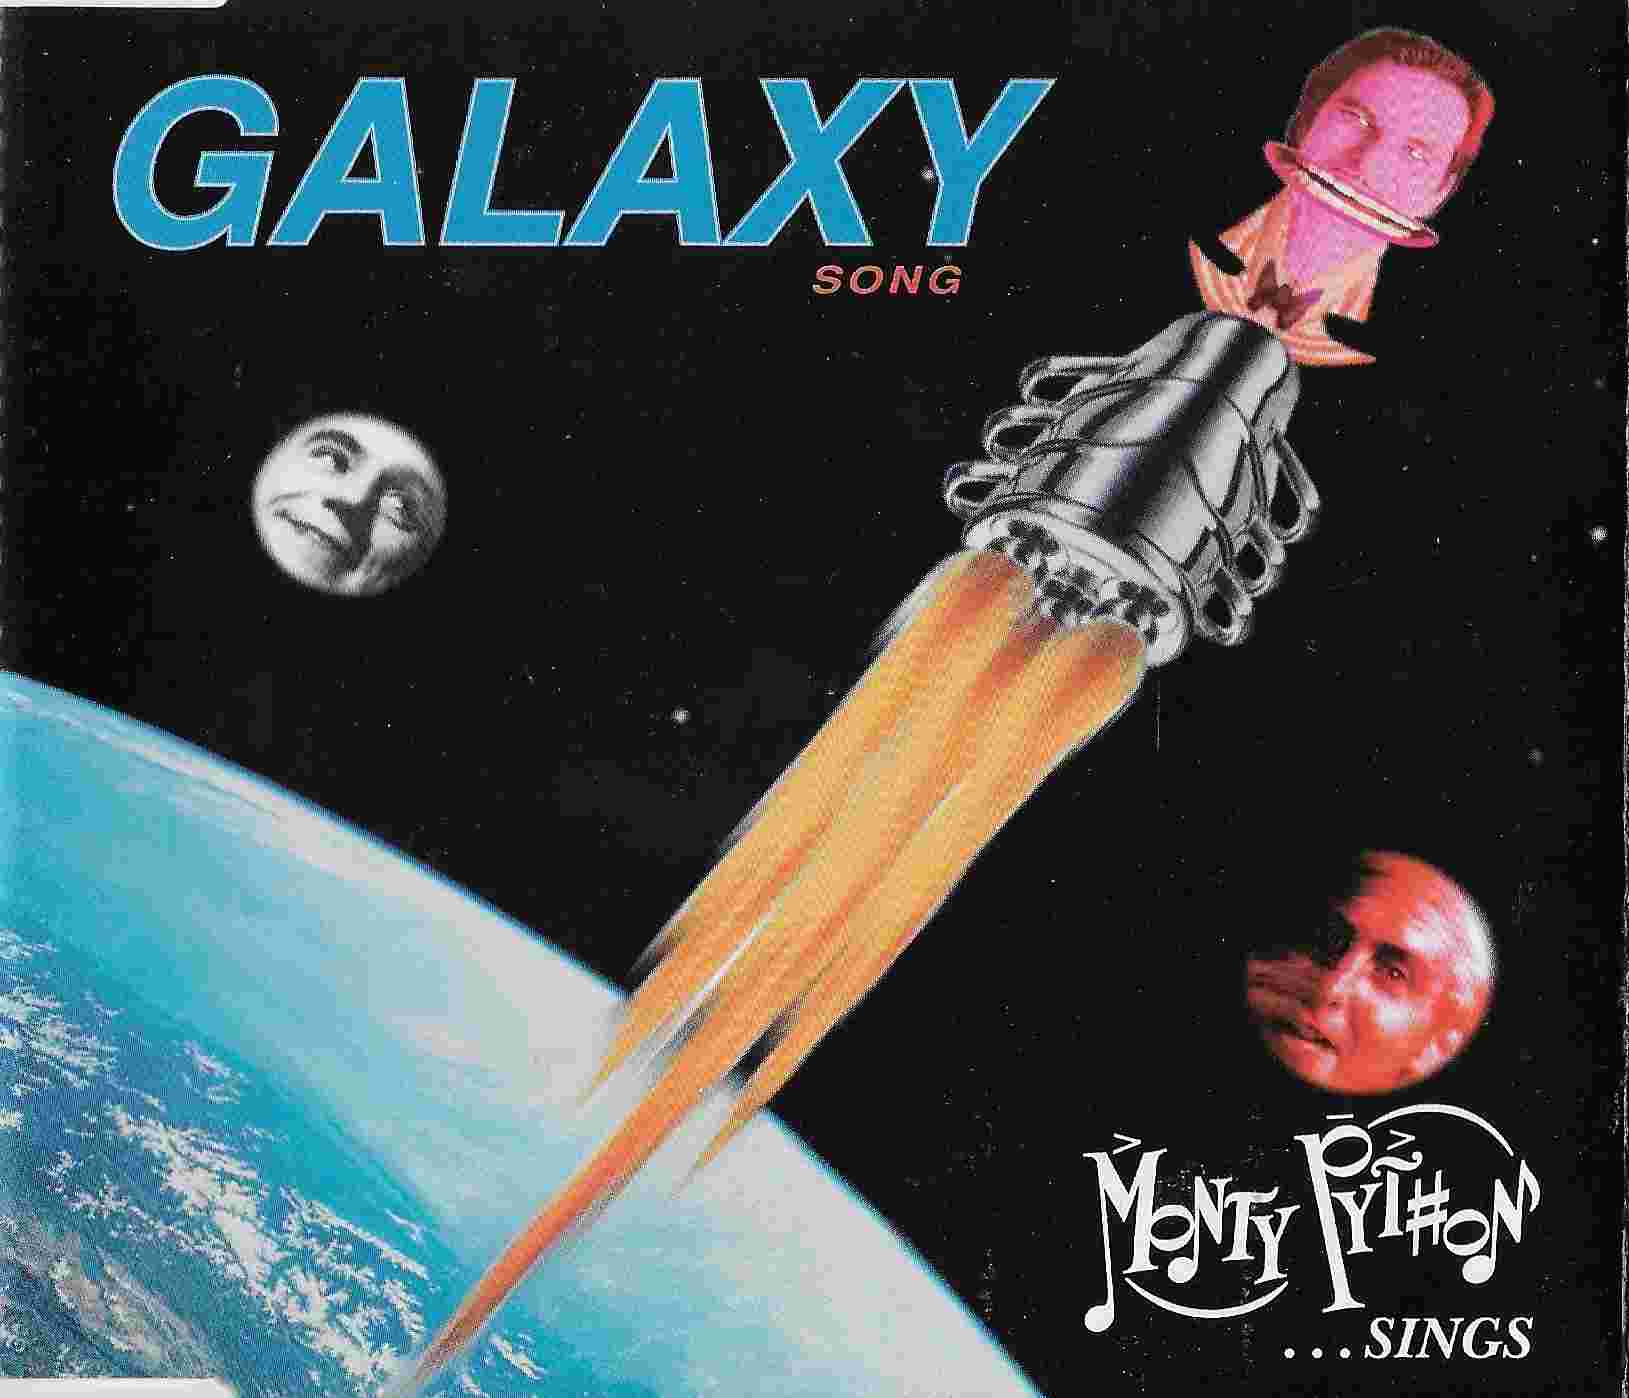 Picture of PYTH D 2 Galaxy song (Monty Python's flying circus) by artist Monty Python from ITV, Channel 4 and Channel 5 cdsingles library